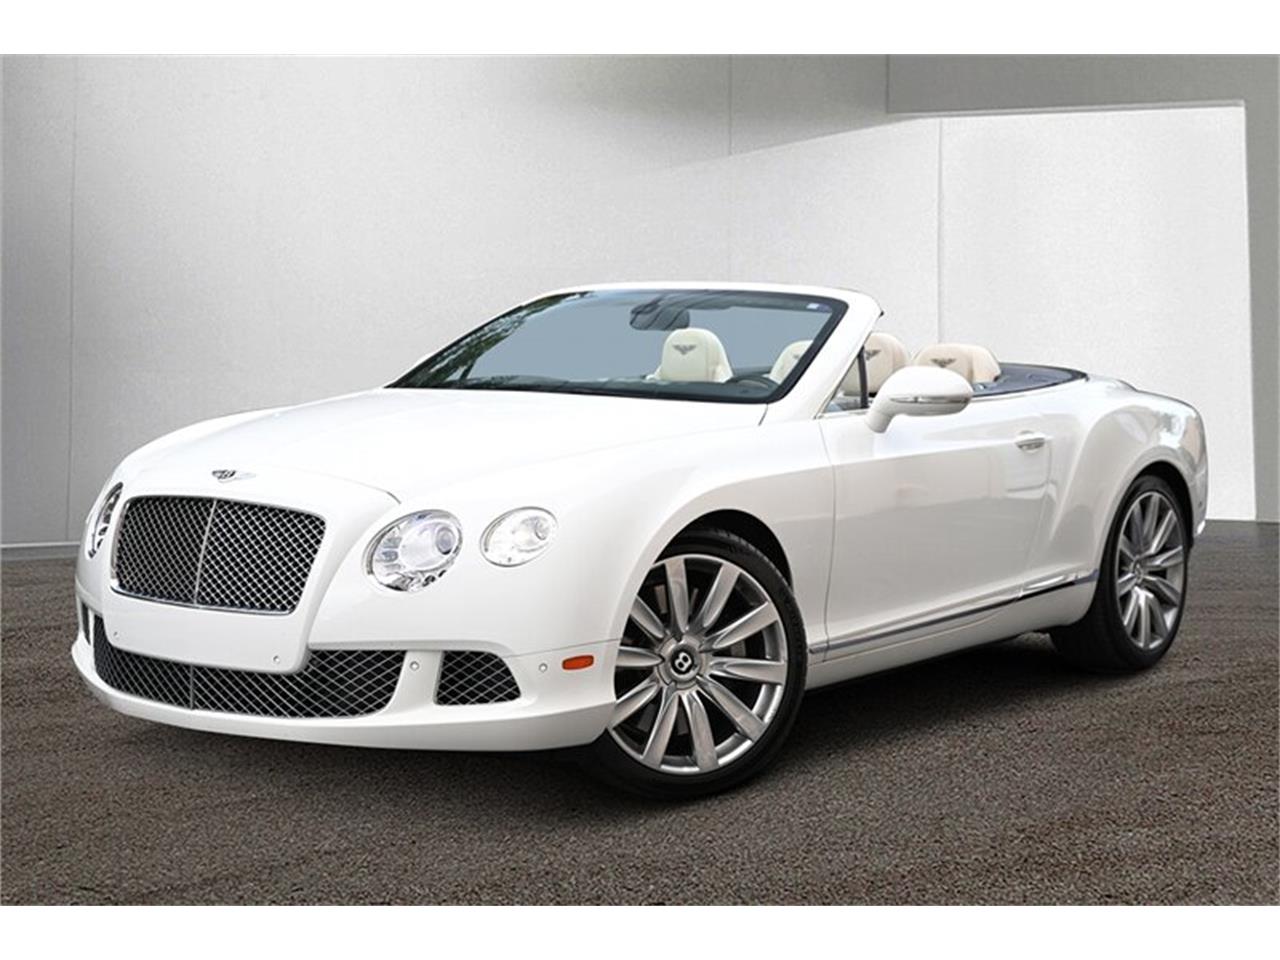 For Sale: 2012 Bentley Continental in Boca Raton, Florida for sale in Boca Raton, FL